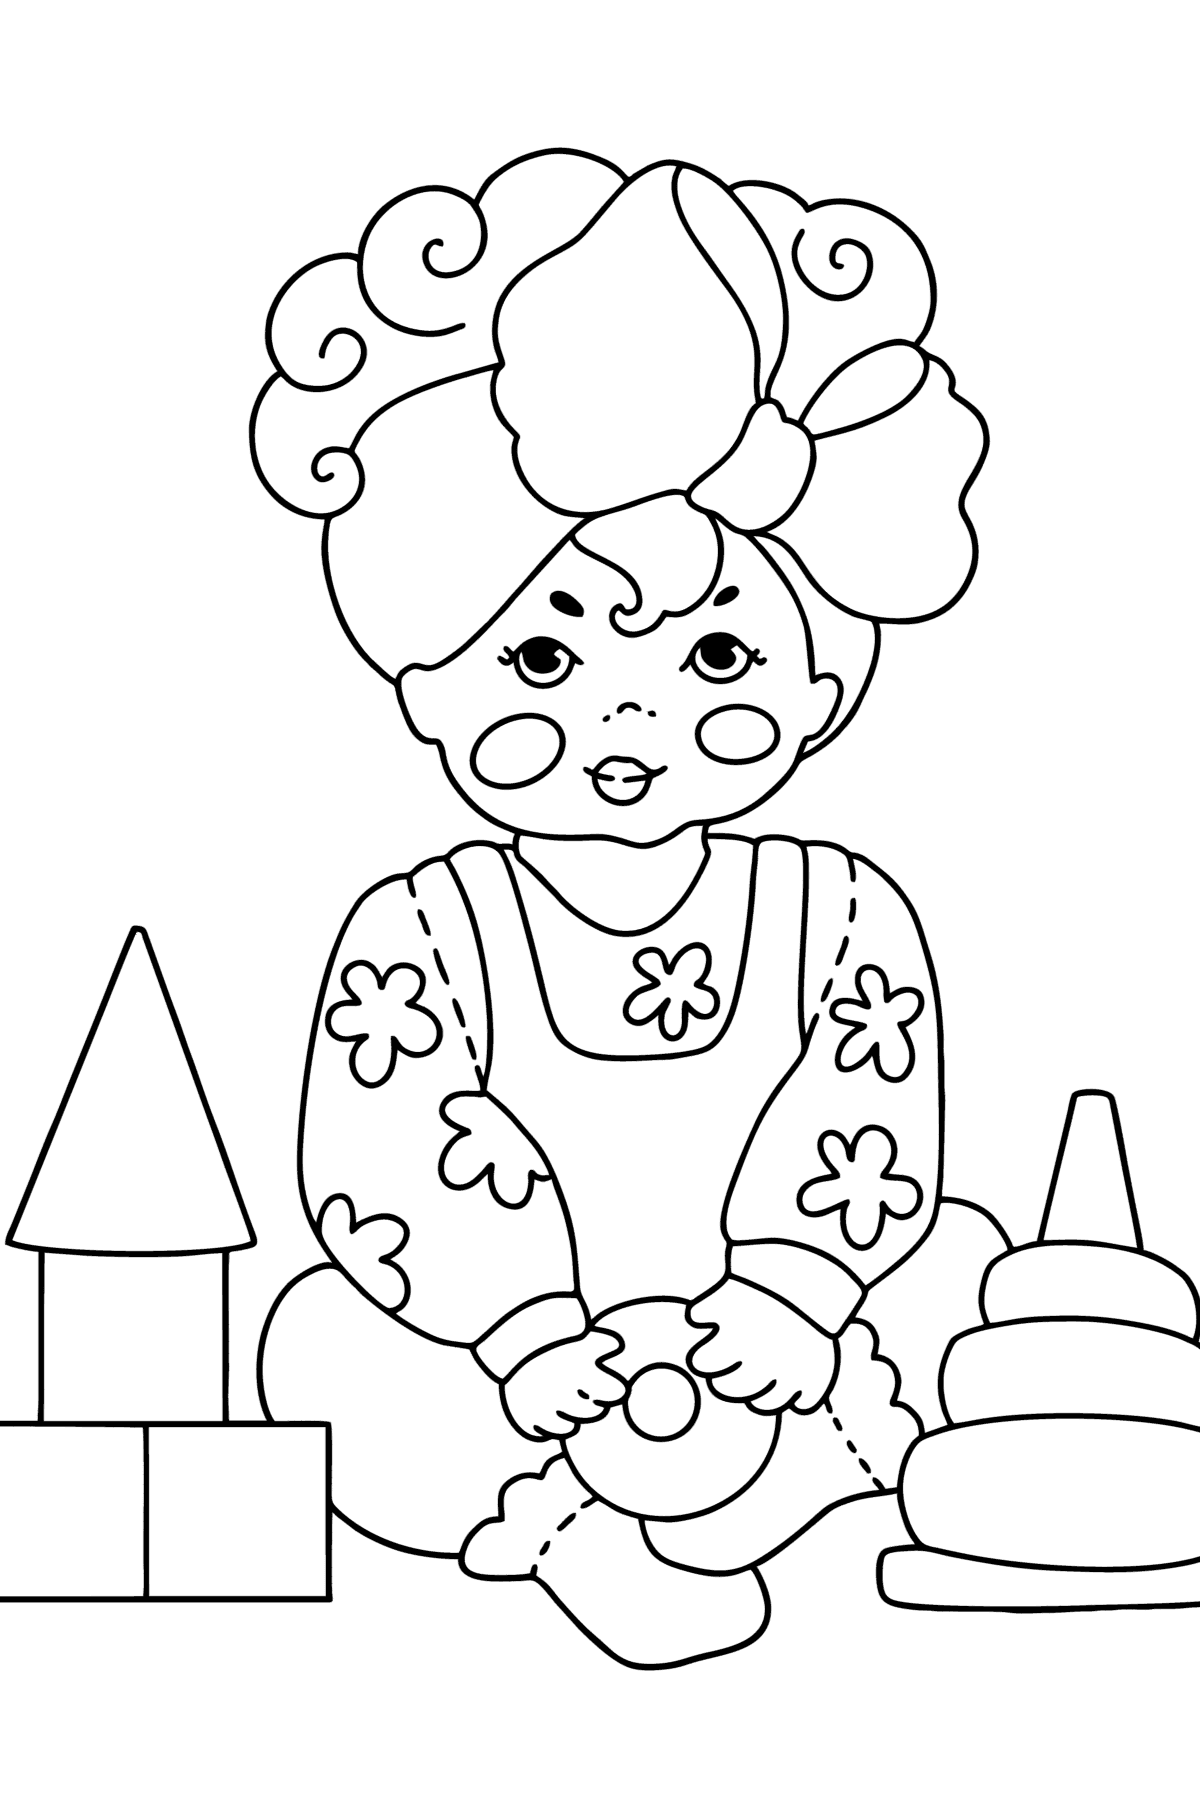 Little girl with a bow сoloring page - Coloring Pages for Kids